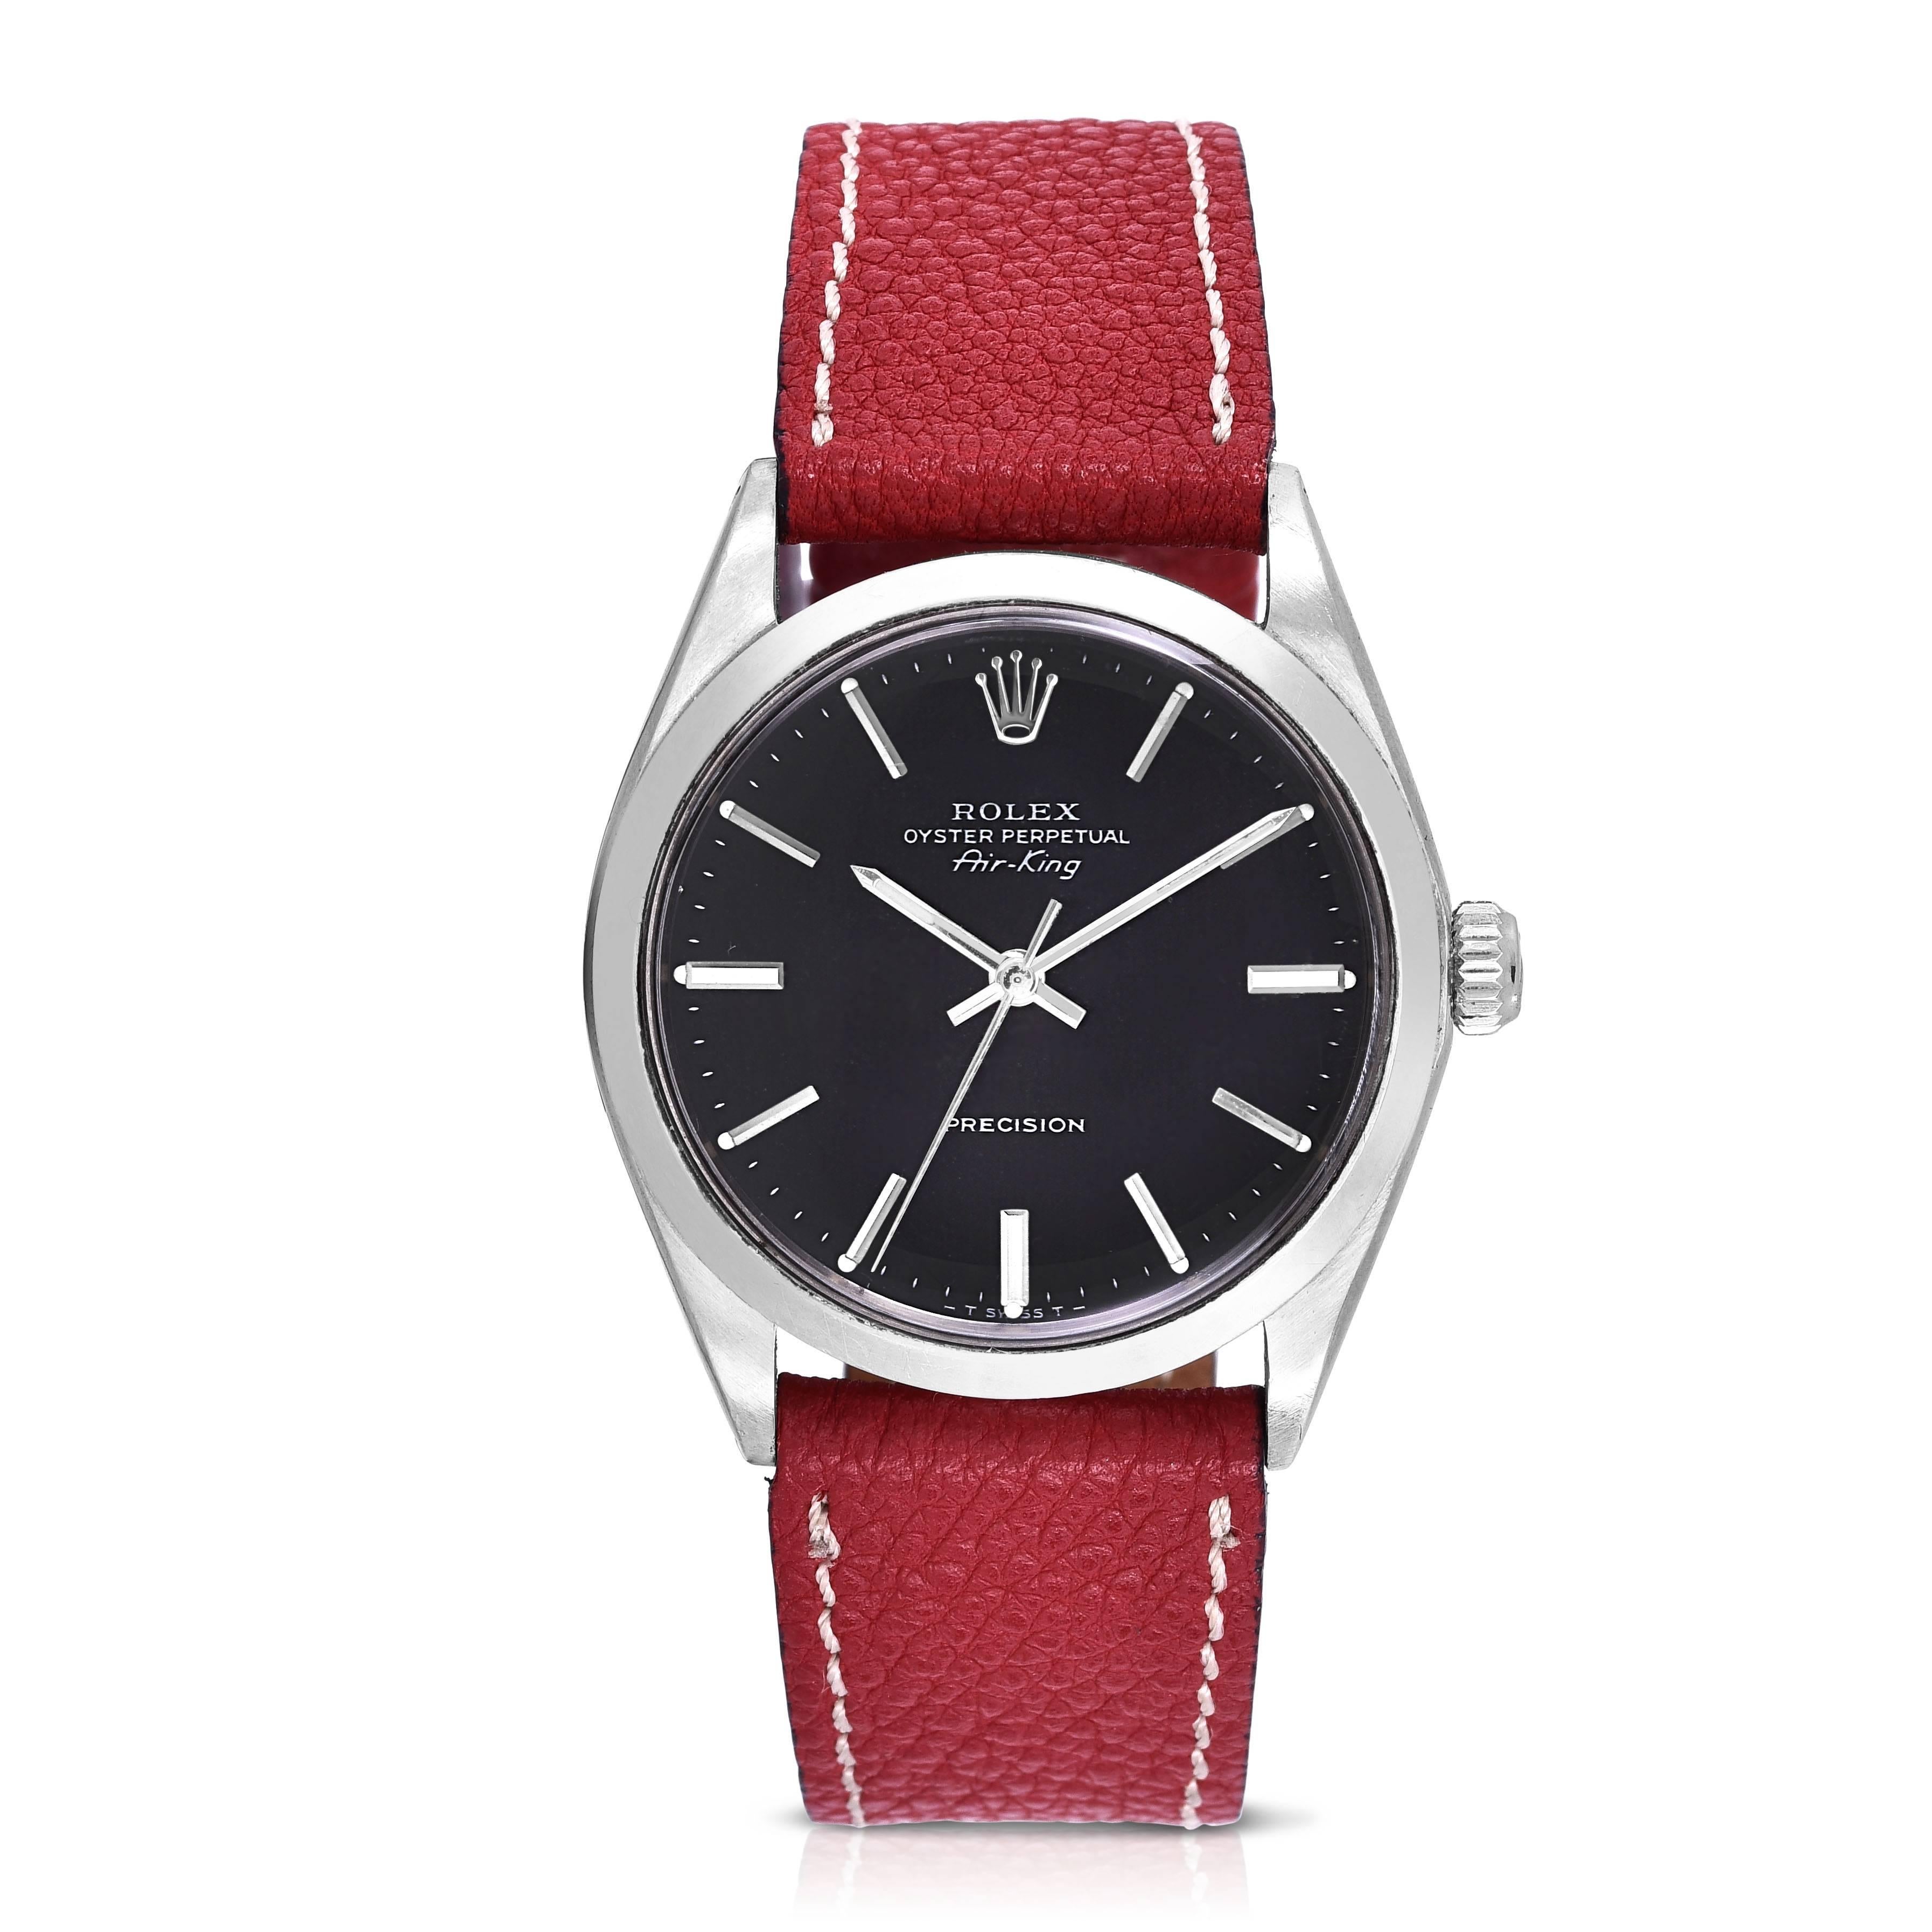 Vintage Rolex Oyster Perpetual Air-King
Factory Grey Stick Dial
34mm in size
1968 Production
Acrylic Crystal
Automatic Movement
Comes Fitted on a New Handmade Red Pebbled Leather Strap
Includes Letter of Authenticity and One-Year Warranty on